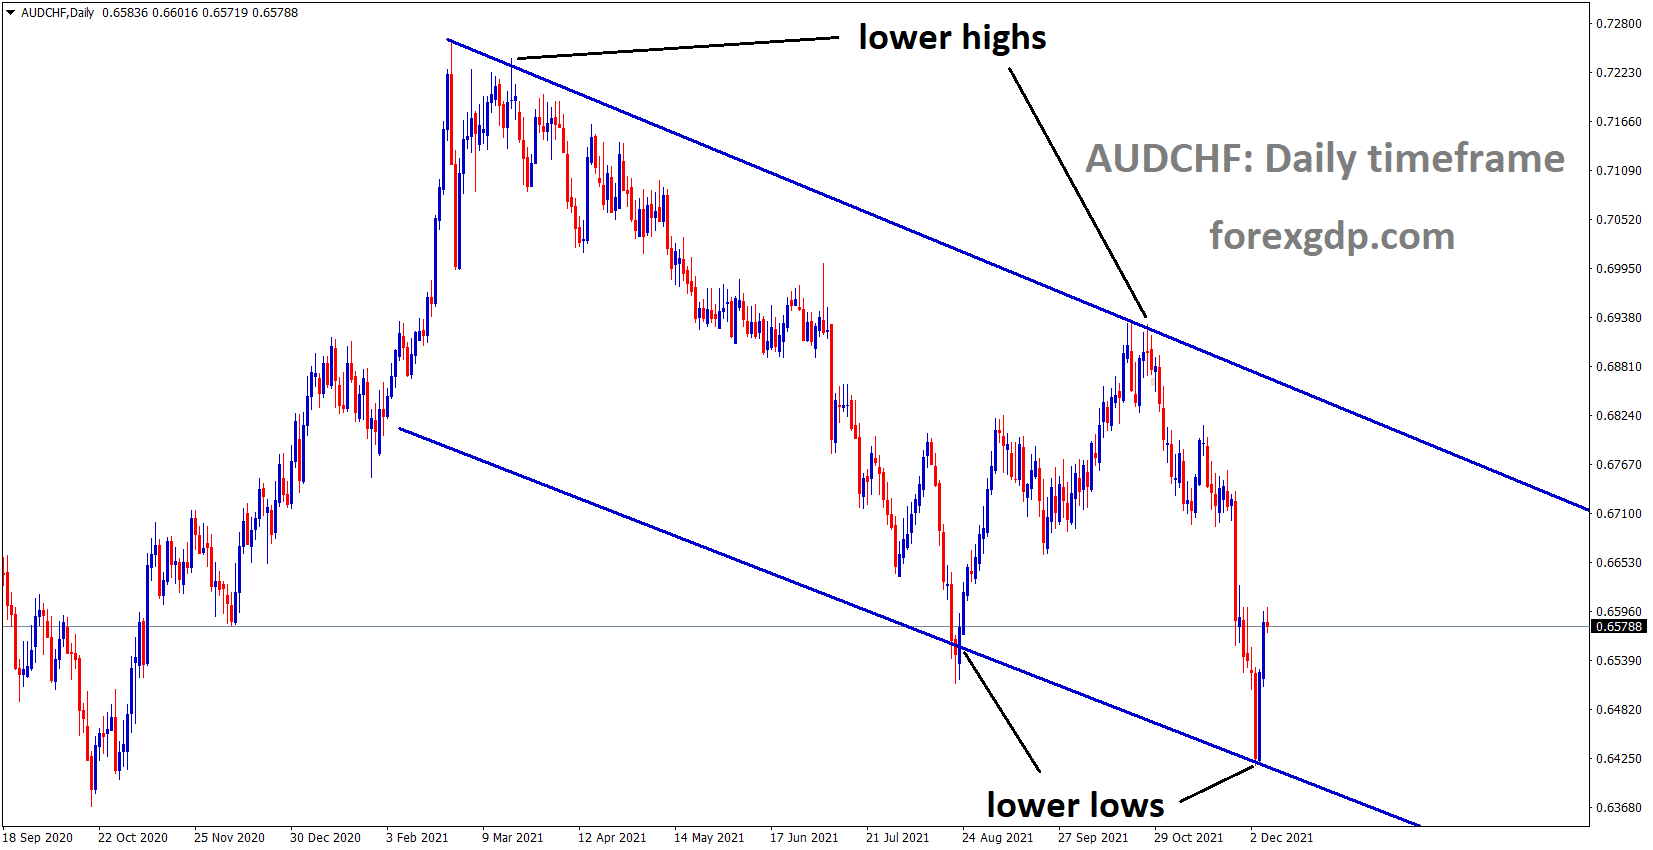 AUDCHF is moving in the Descending channel and the market has rebounded from the lower low area.